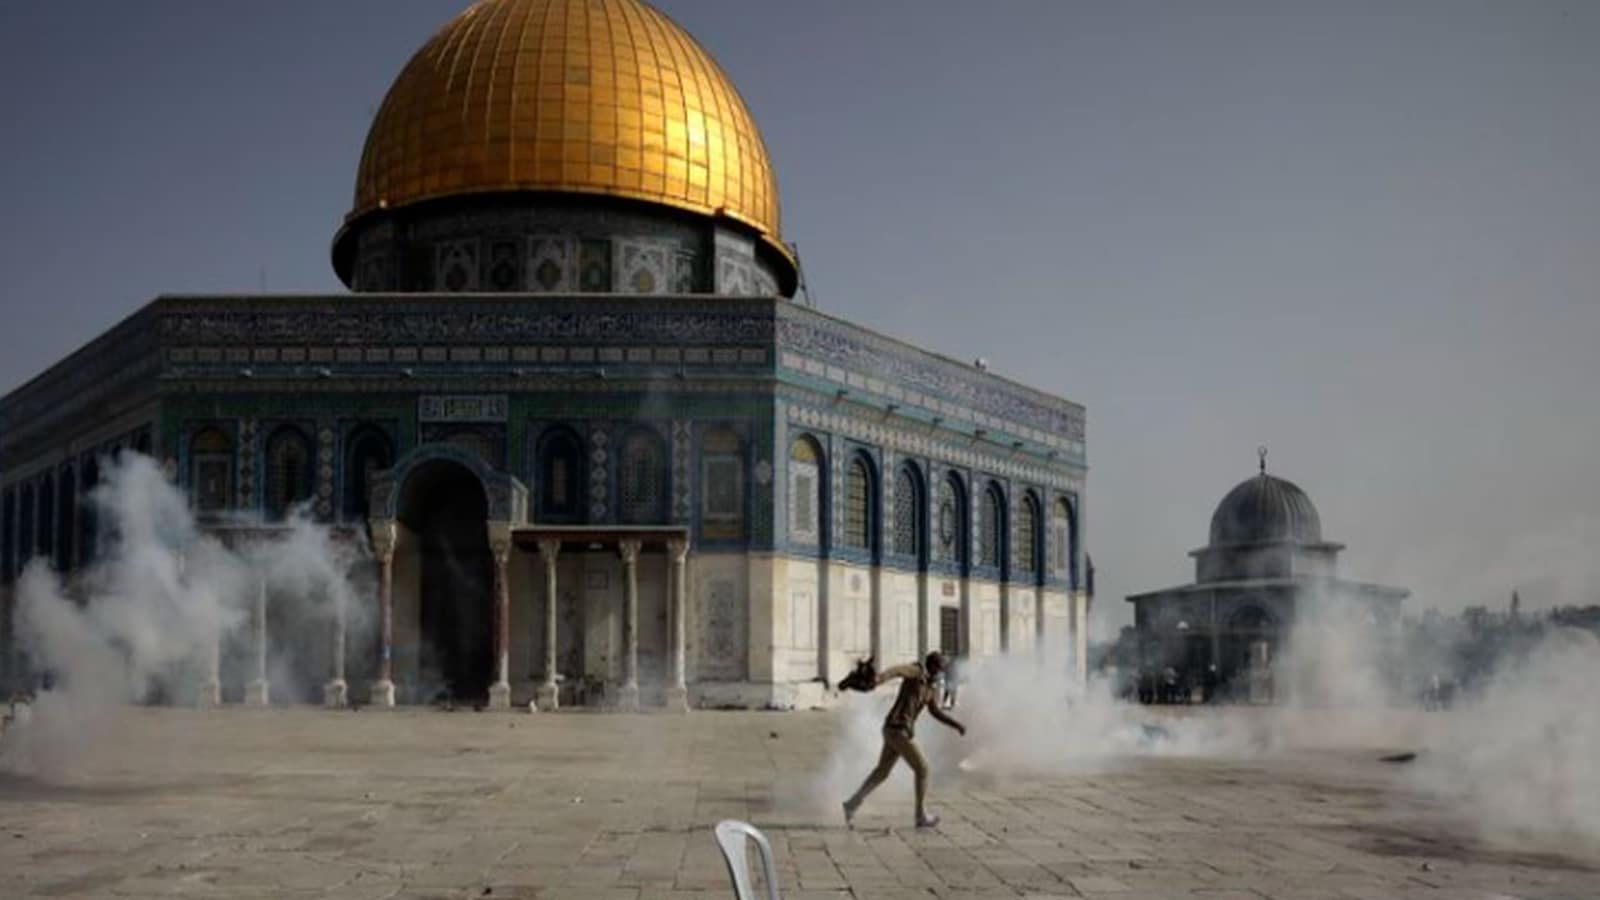 Israel-Palestine conflict: Why the Al-Aqsa Mosque has often been a site of  conflict